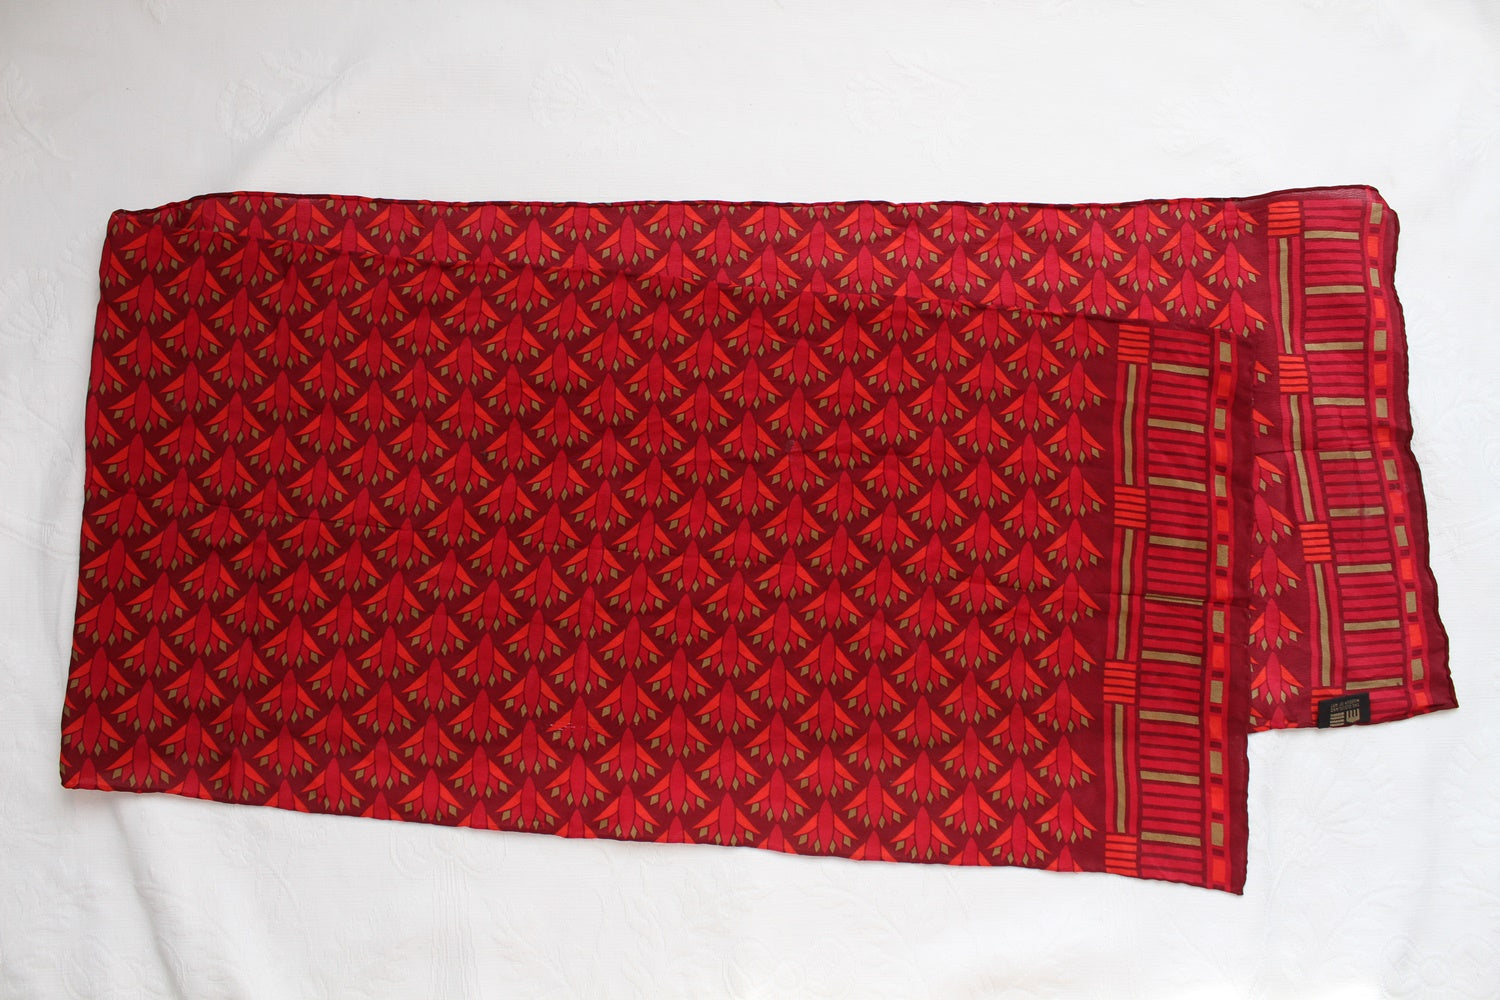 CLEVELAND MUSEUM OF ART 100% SILK SCARF RED